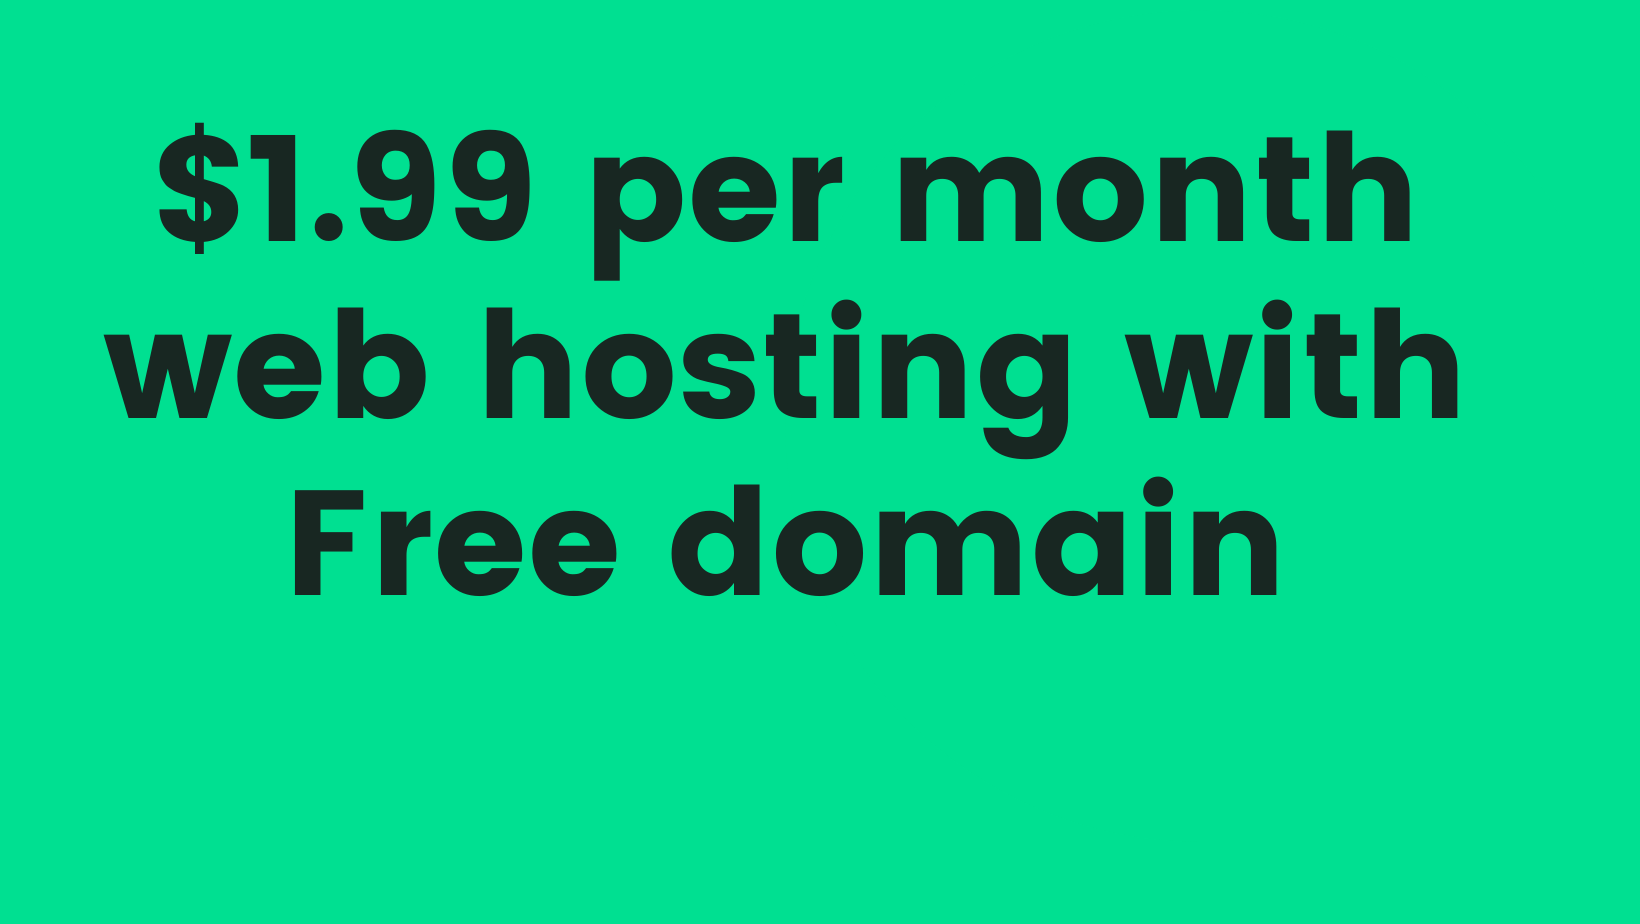 $1.99 per month web hosting with Free domain